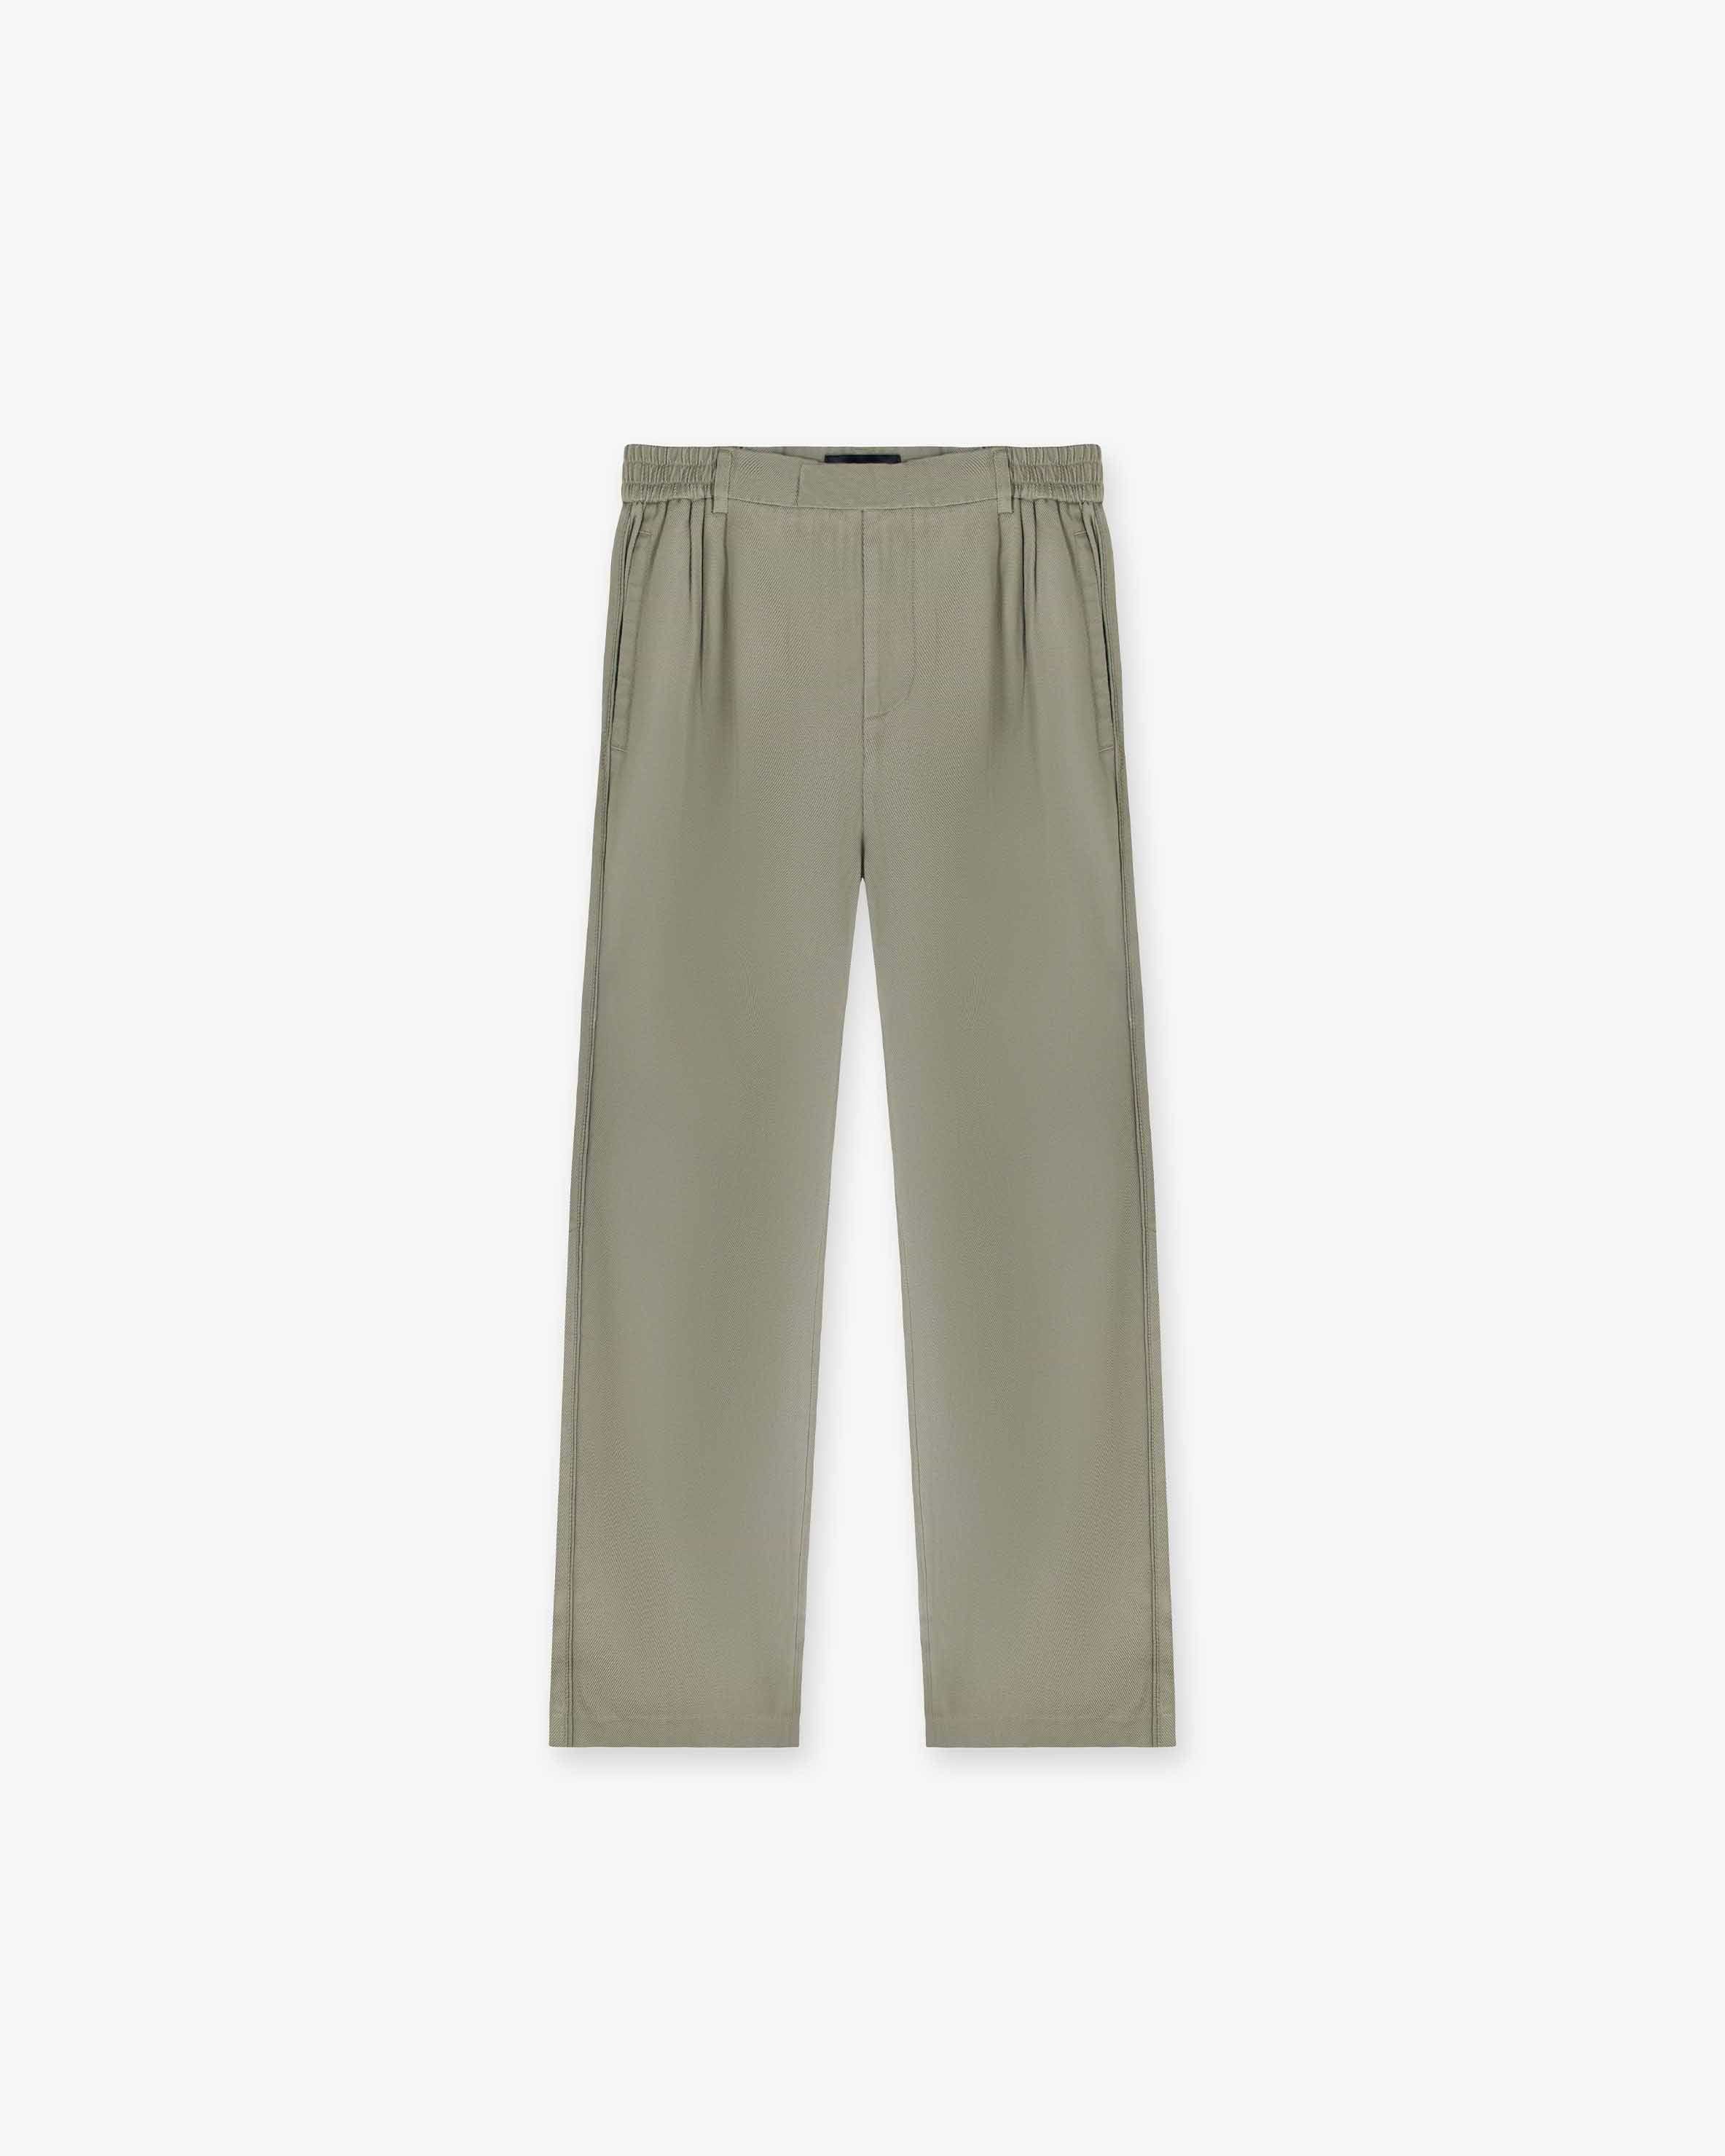 11 best walking trousers 2021 | The Independent | The Independent